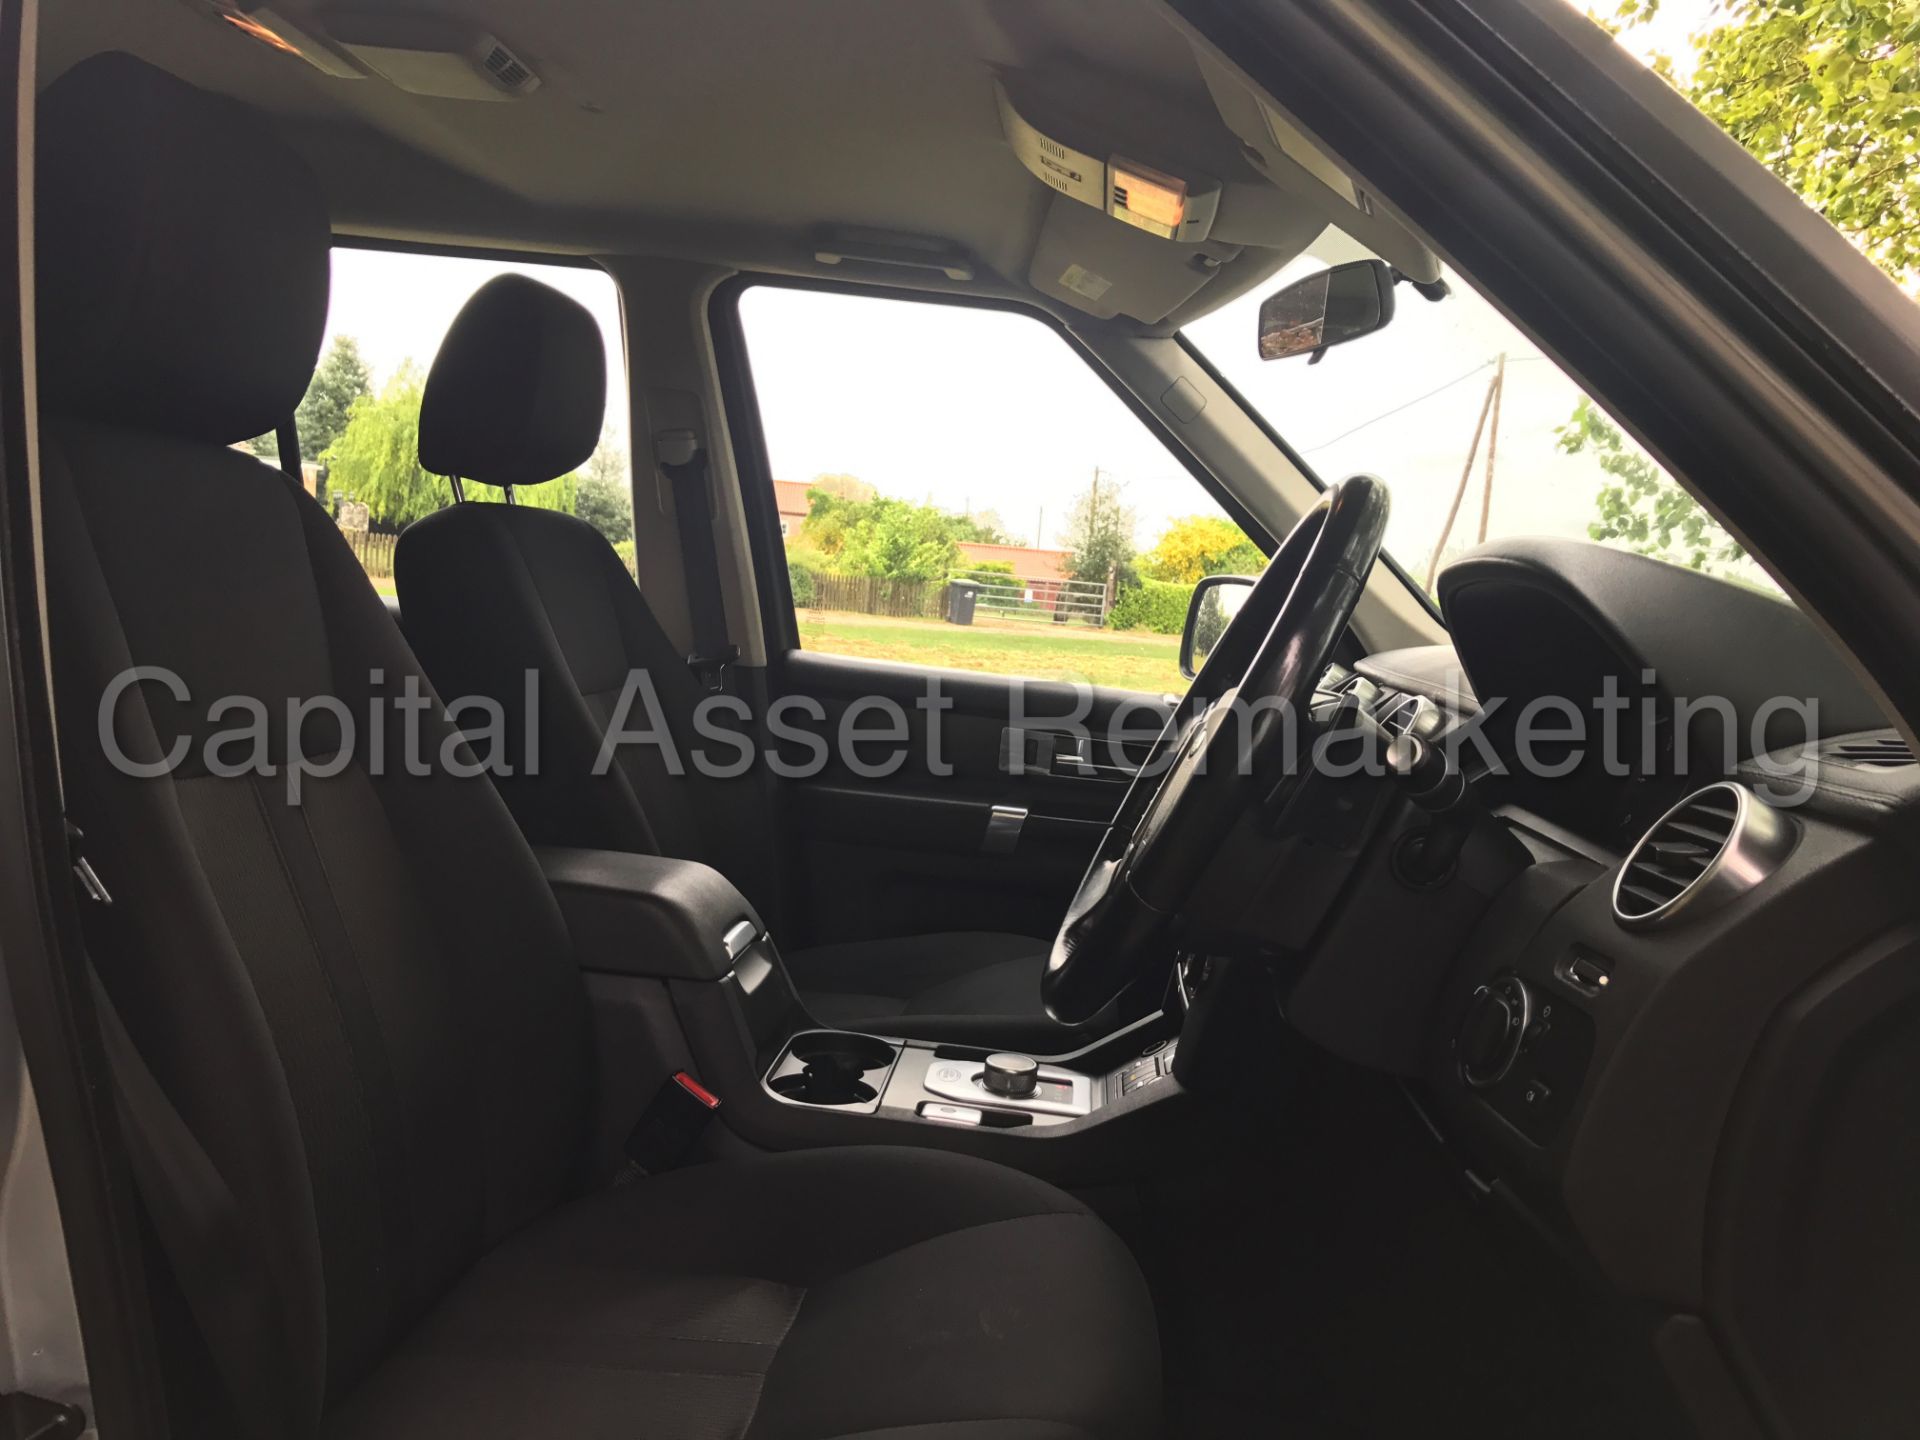 (On sale) LAND ROVER DISCOVERY 4 (2014 MODEL) '3.0 SDV6 -AUTO- 255 BHP - 7 SEATER'(1 OWNER FROM NEW) - Image 19 of 42